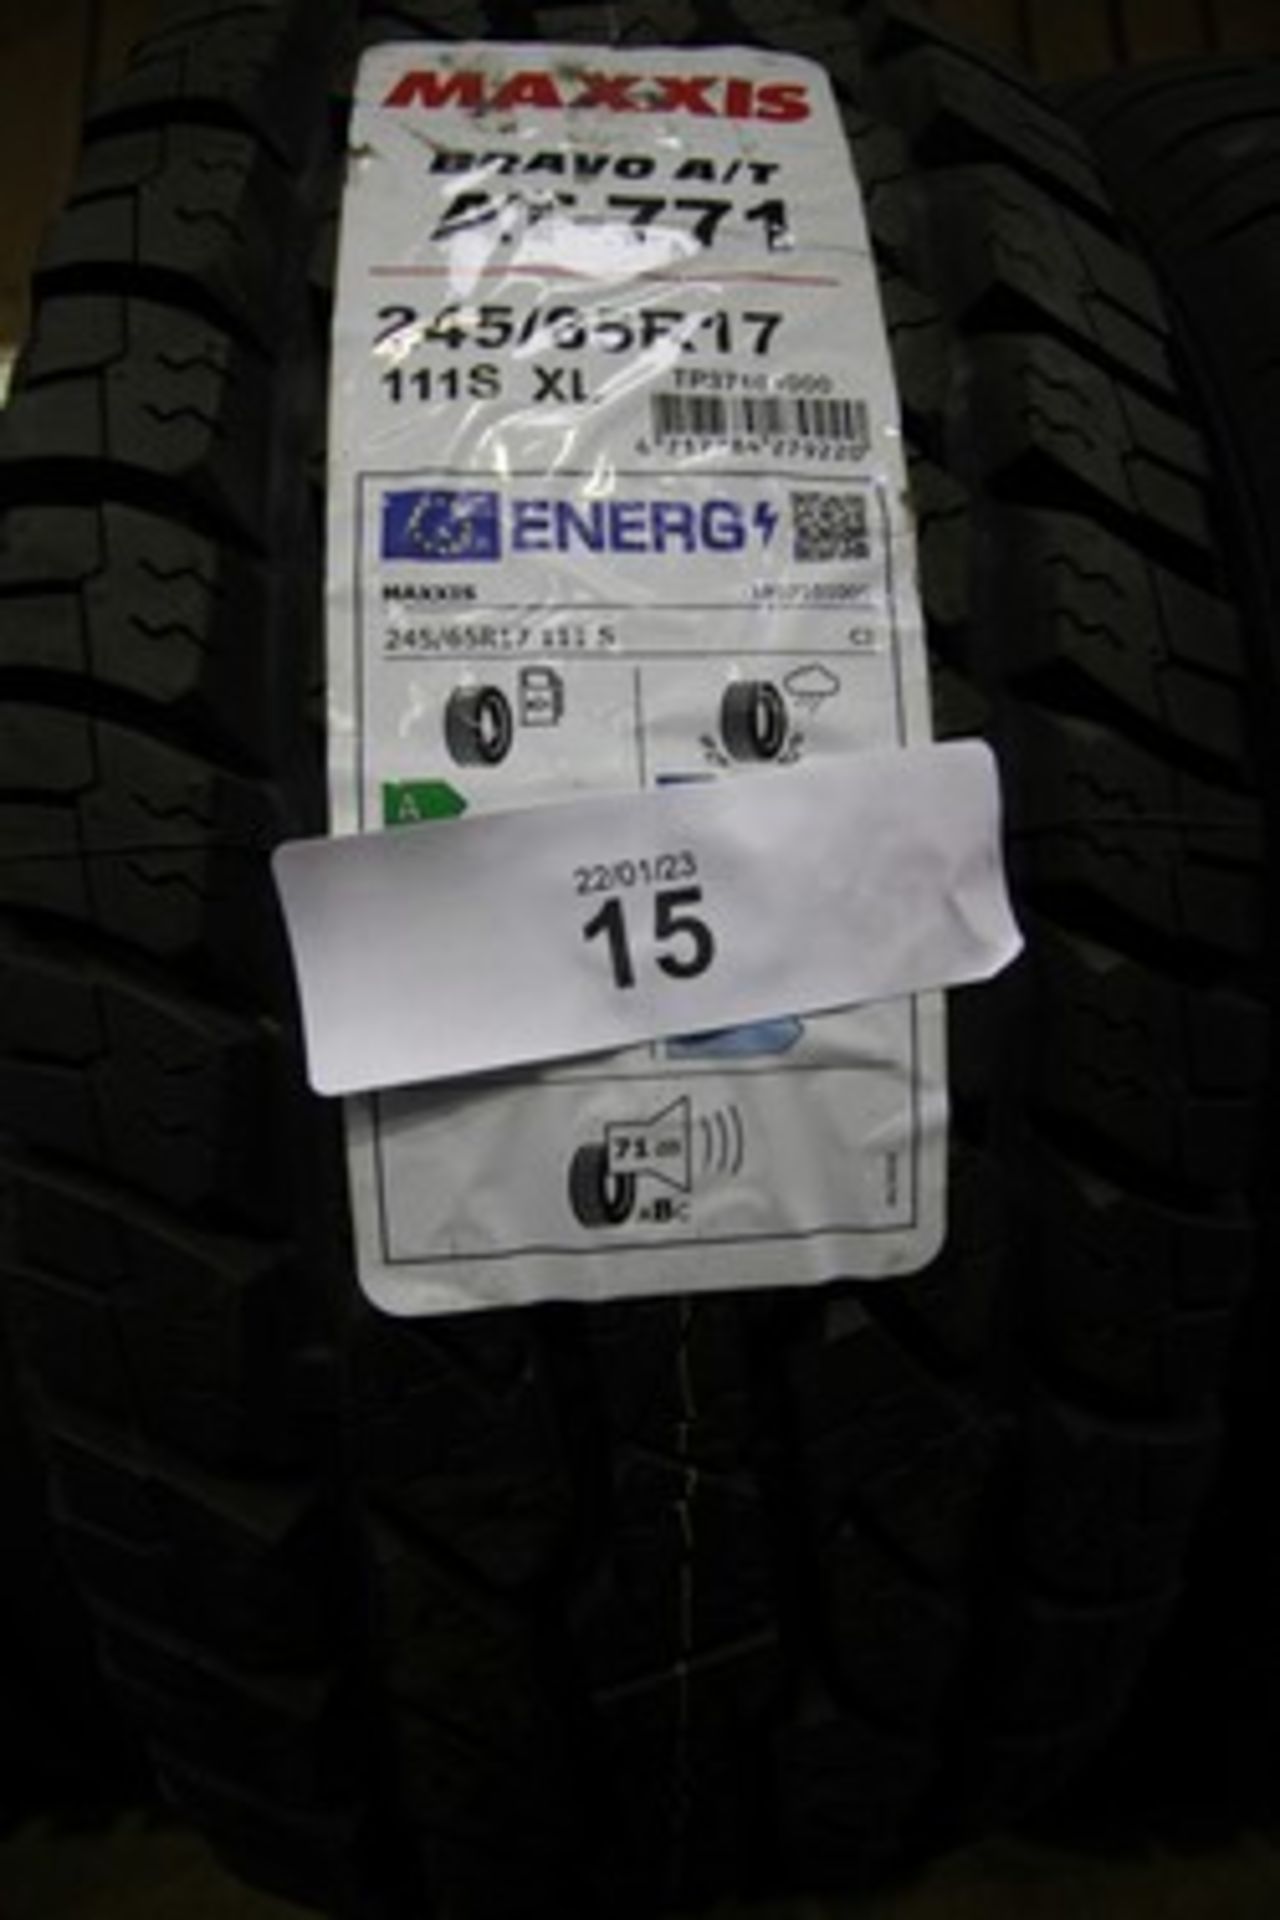 1 x Maxxis Bravo A/T AT-771 tyre, size 245/65 R17 111 SXL - new with label (GS4)